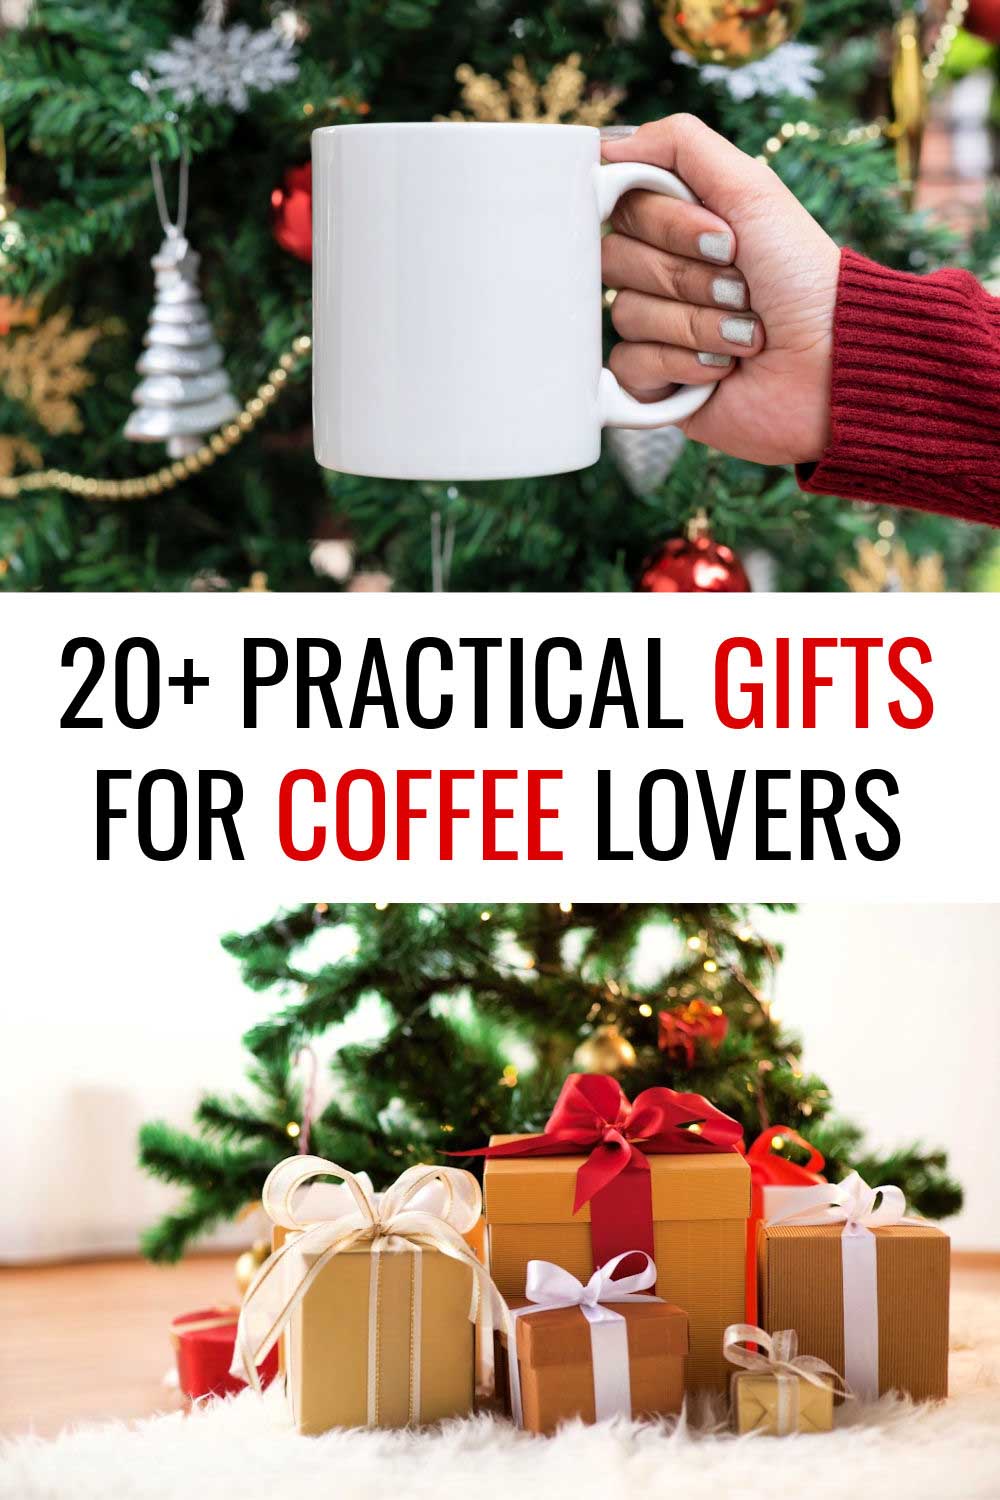 20+ Practical Gifts for Coffee Lovers